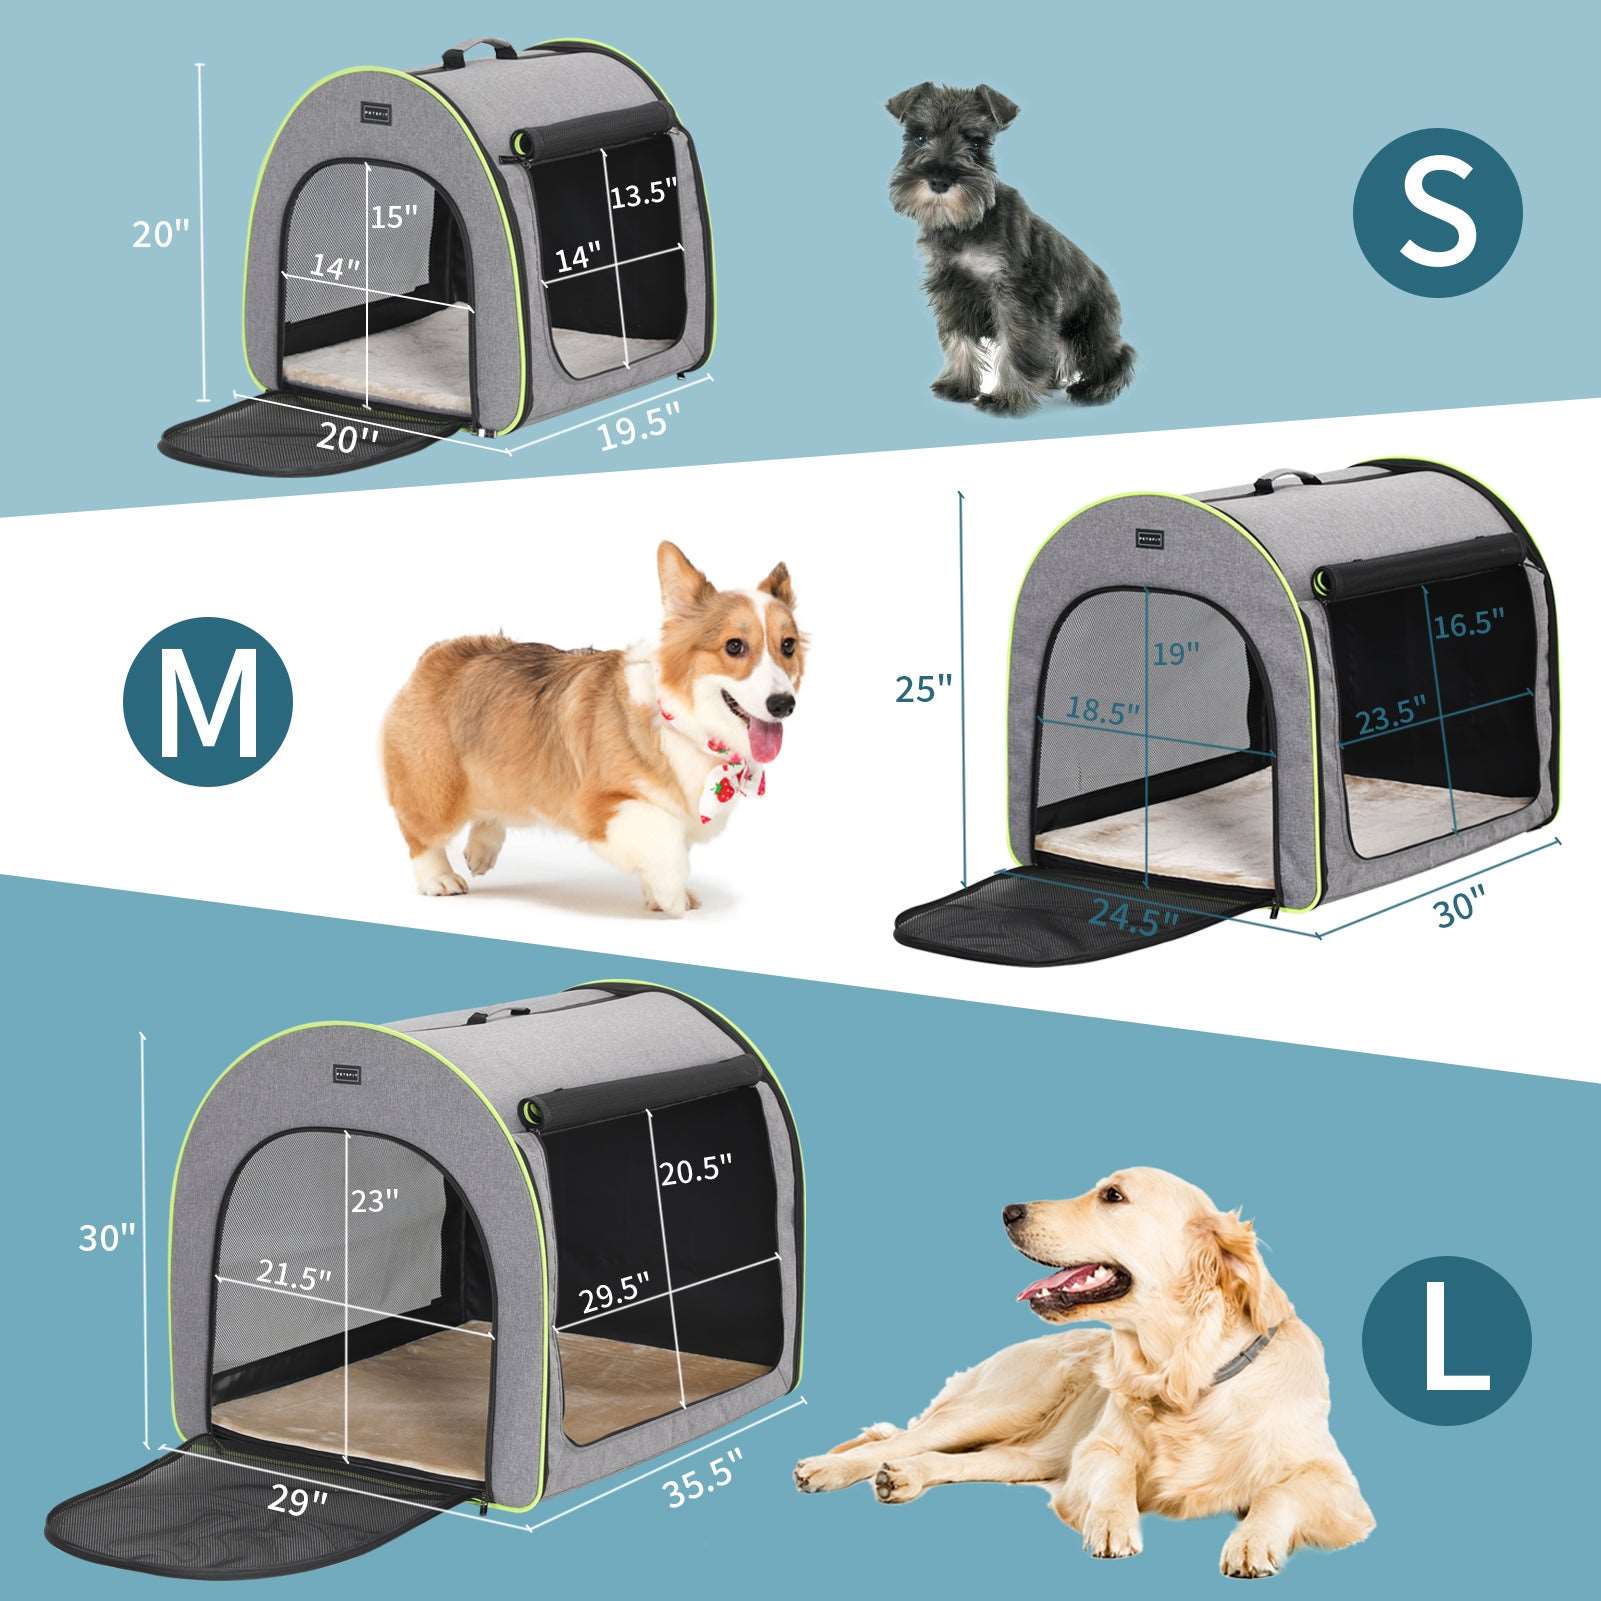 Petsfit-Portable-Soft-Collapsible-Dog-Crate-Travel-Soft-Kennel-02